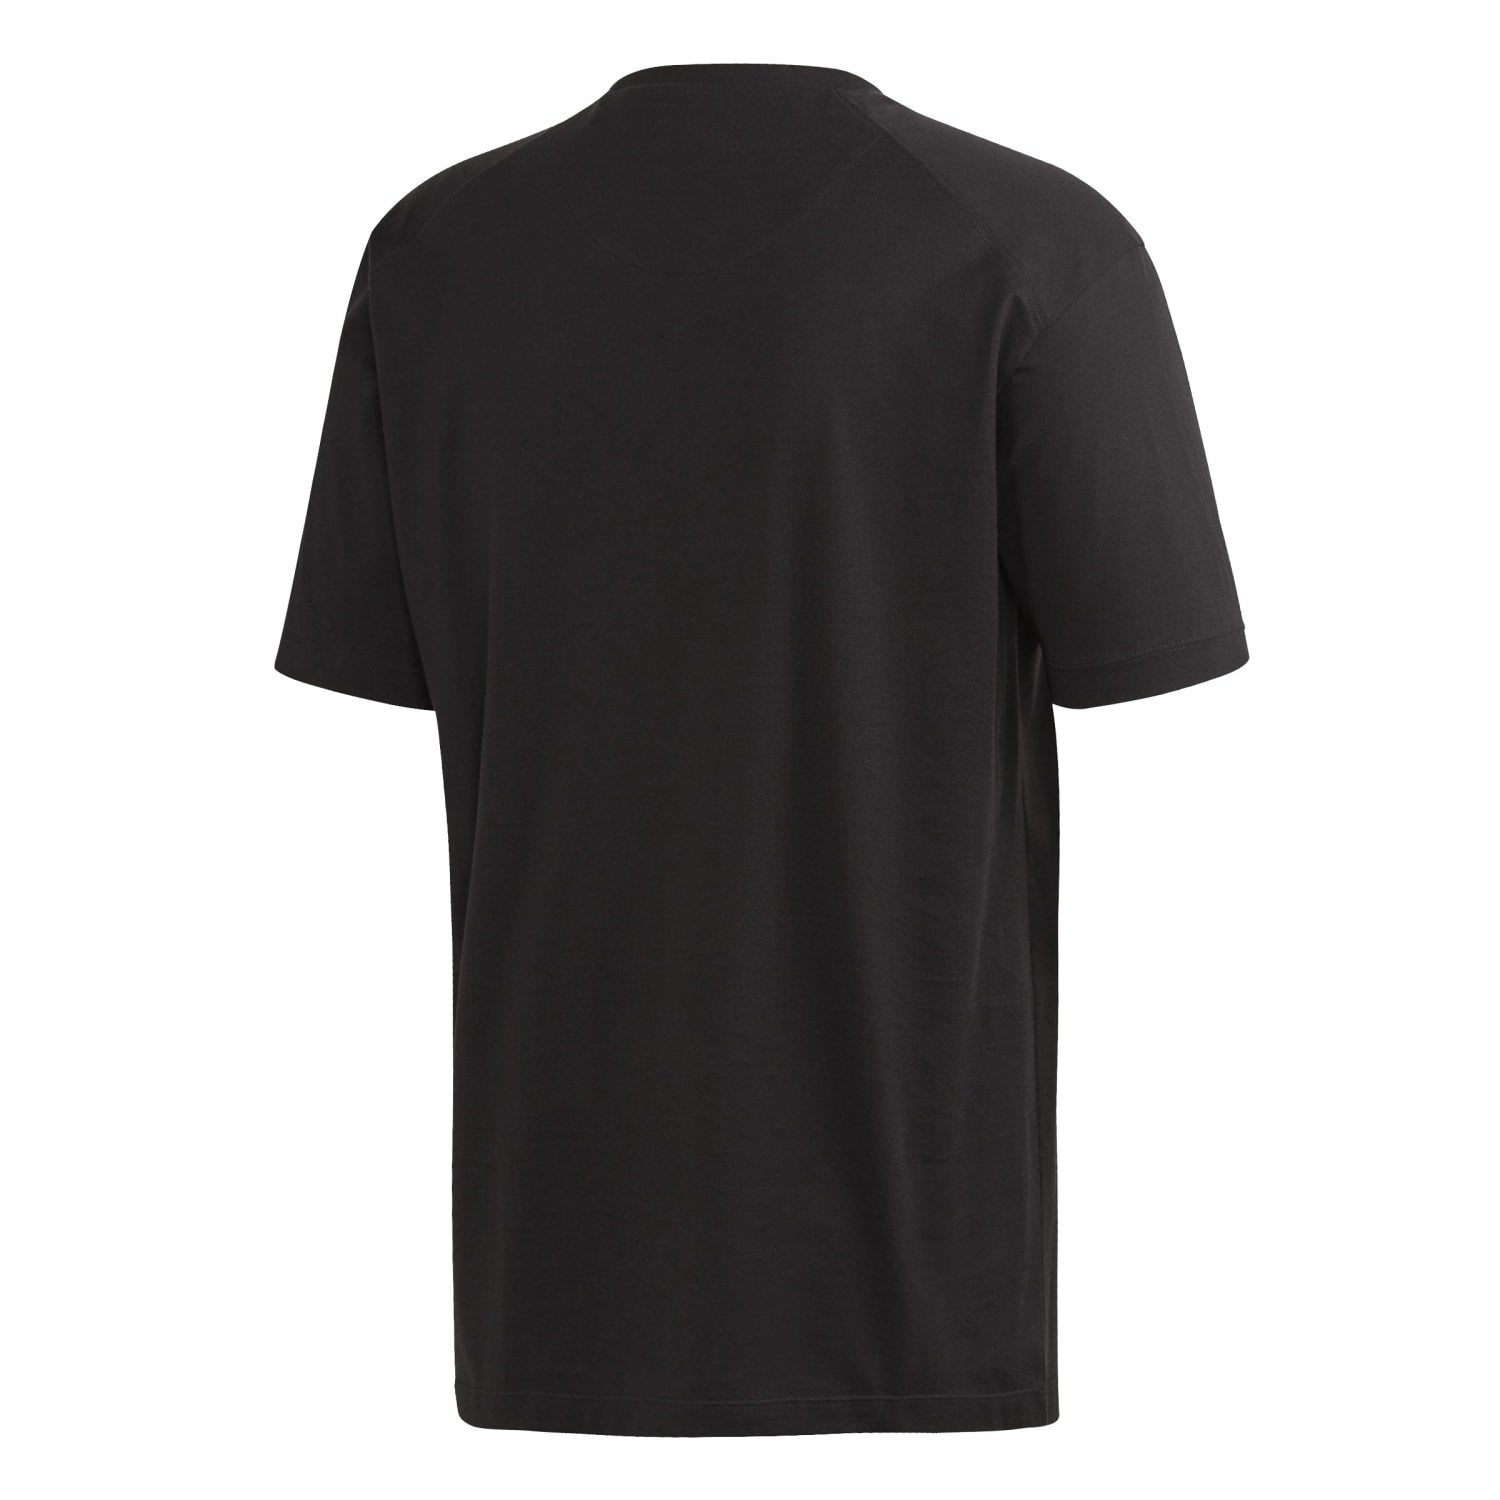 Adidas stock Men Y - 3 CL SS Tee Black FN3358 - T - SHIRTS Canada